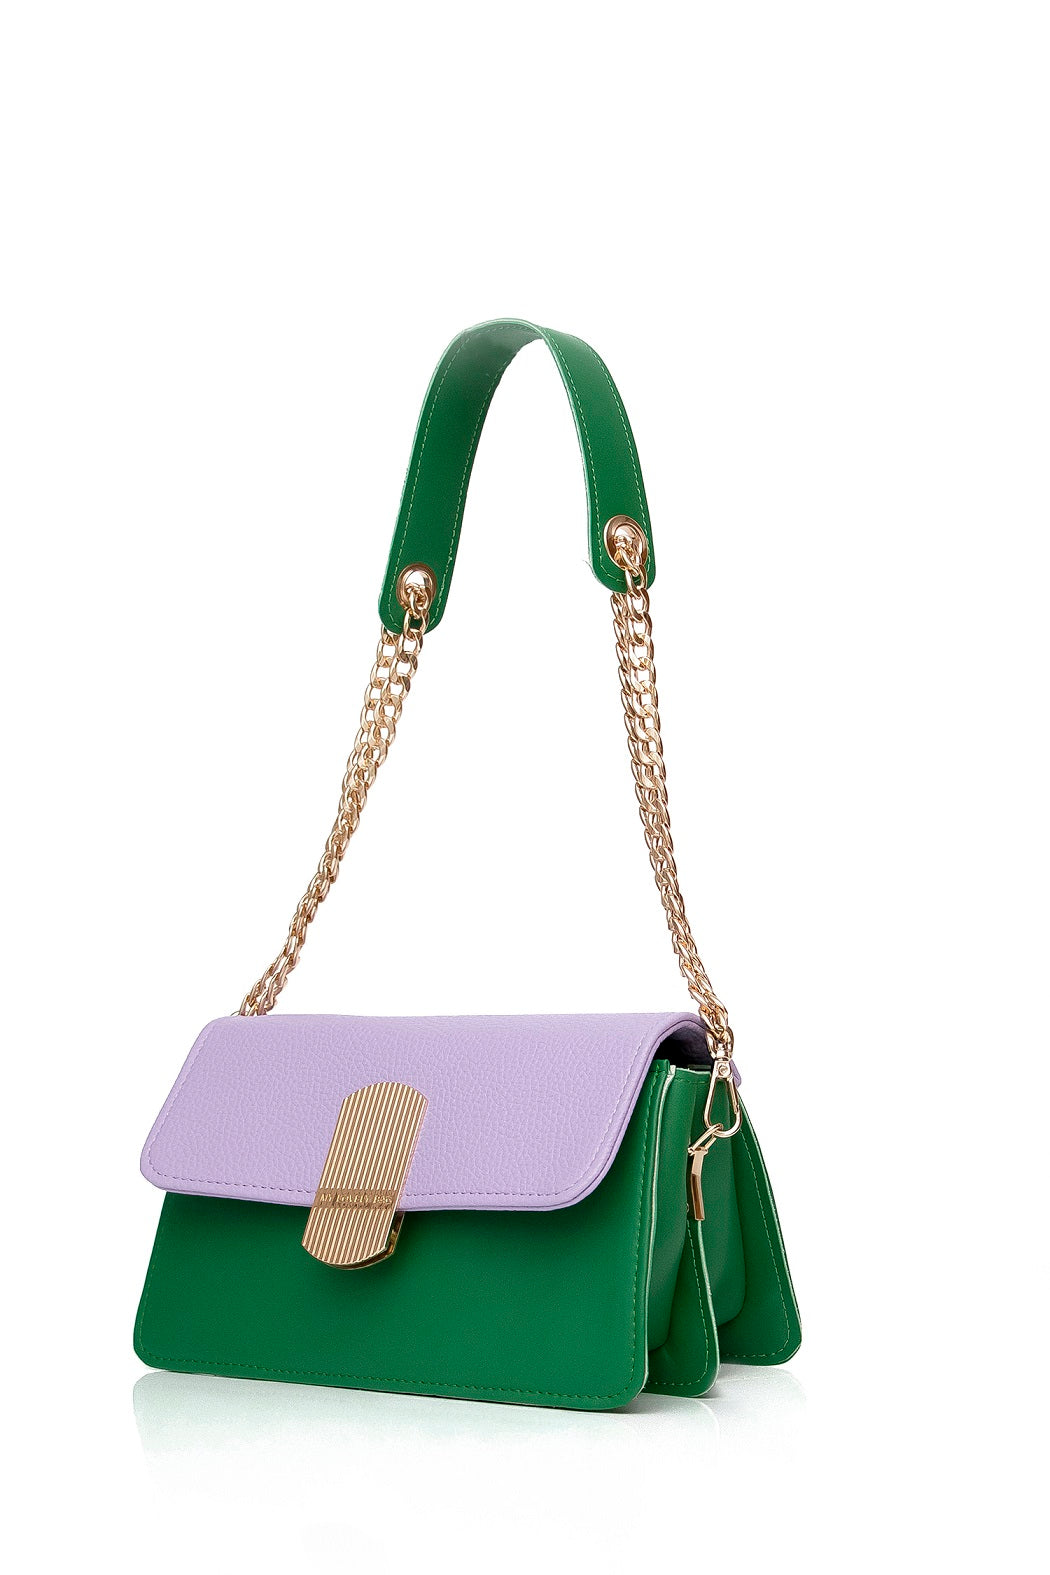 Best tote bag for women - BAG - EVELYN - GREEN PURPLE GOLD